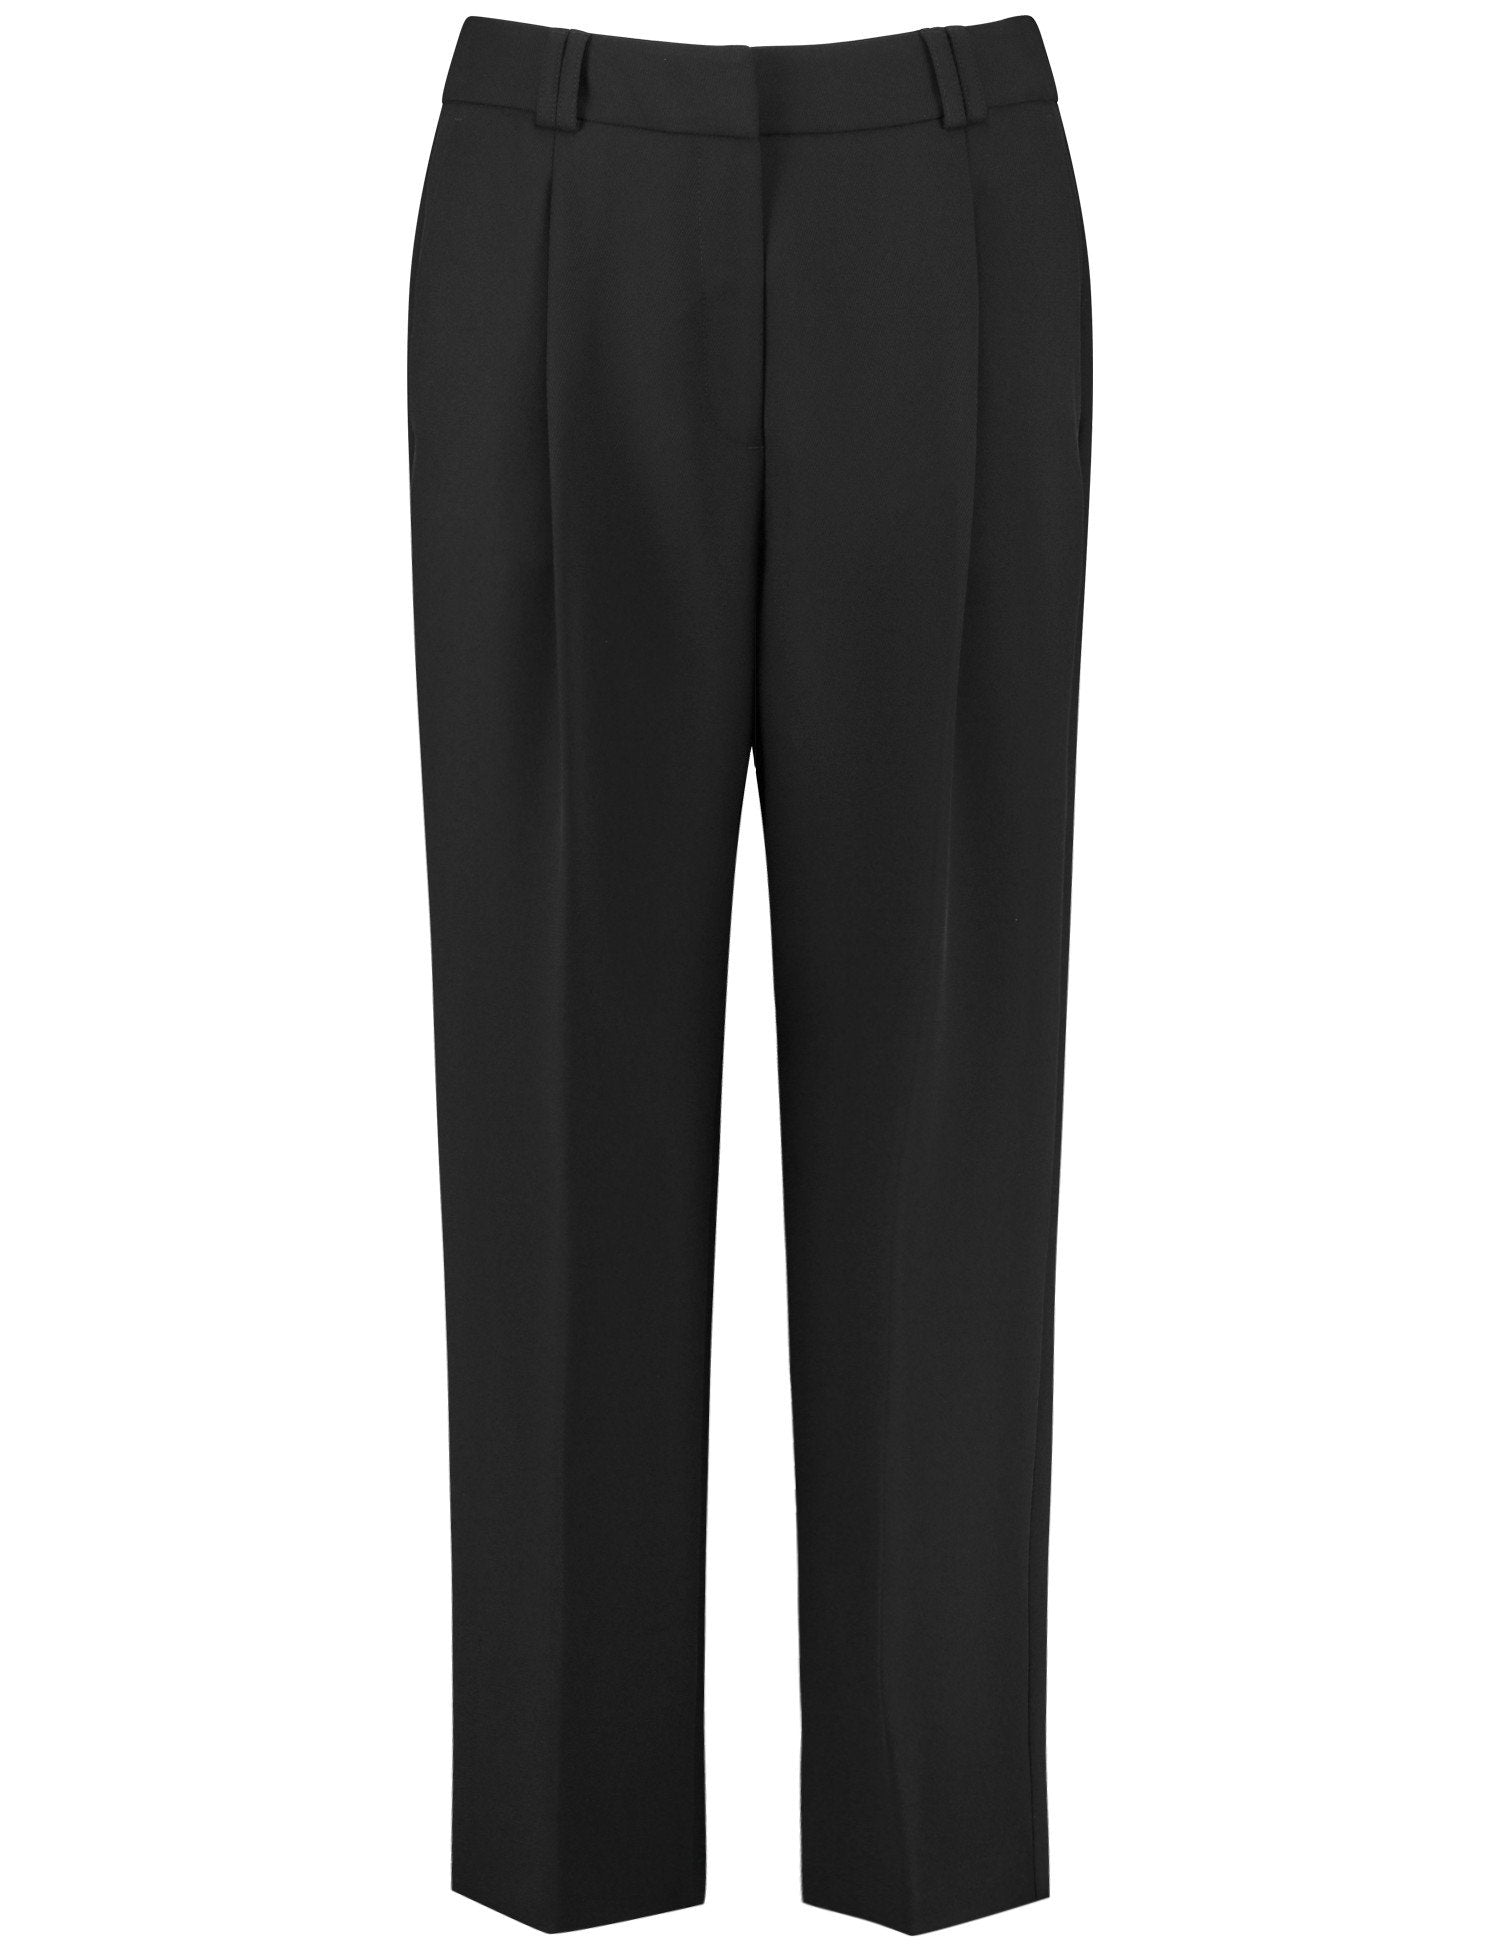 Smart 3/4-Length Trousers_520347-11087_1100_07